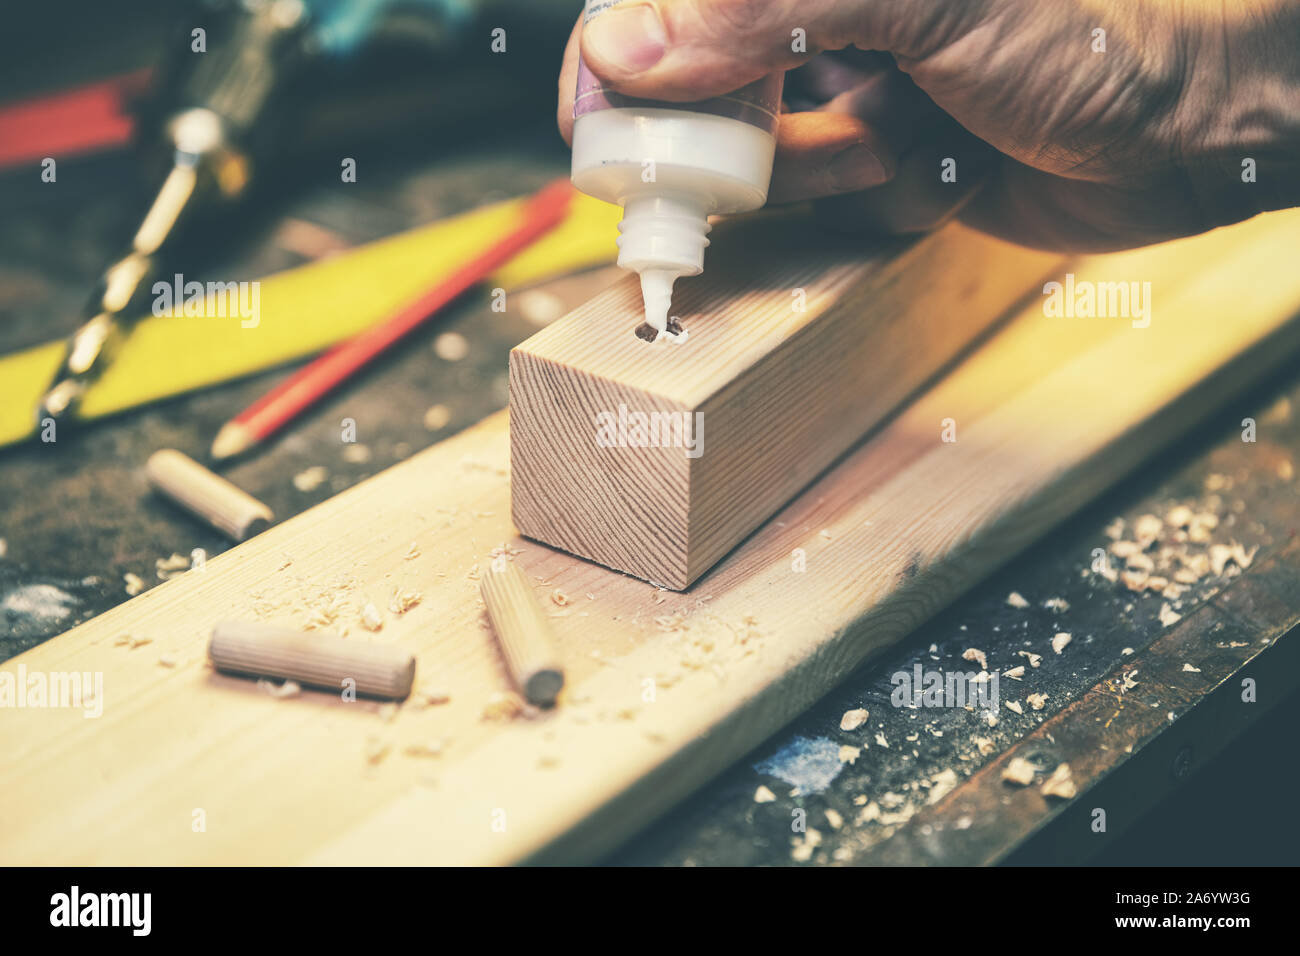 joinery - joiner put the glue into a drilled hole for wooden dowel joint Stock Photo